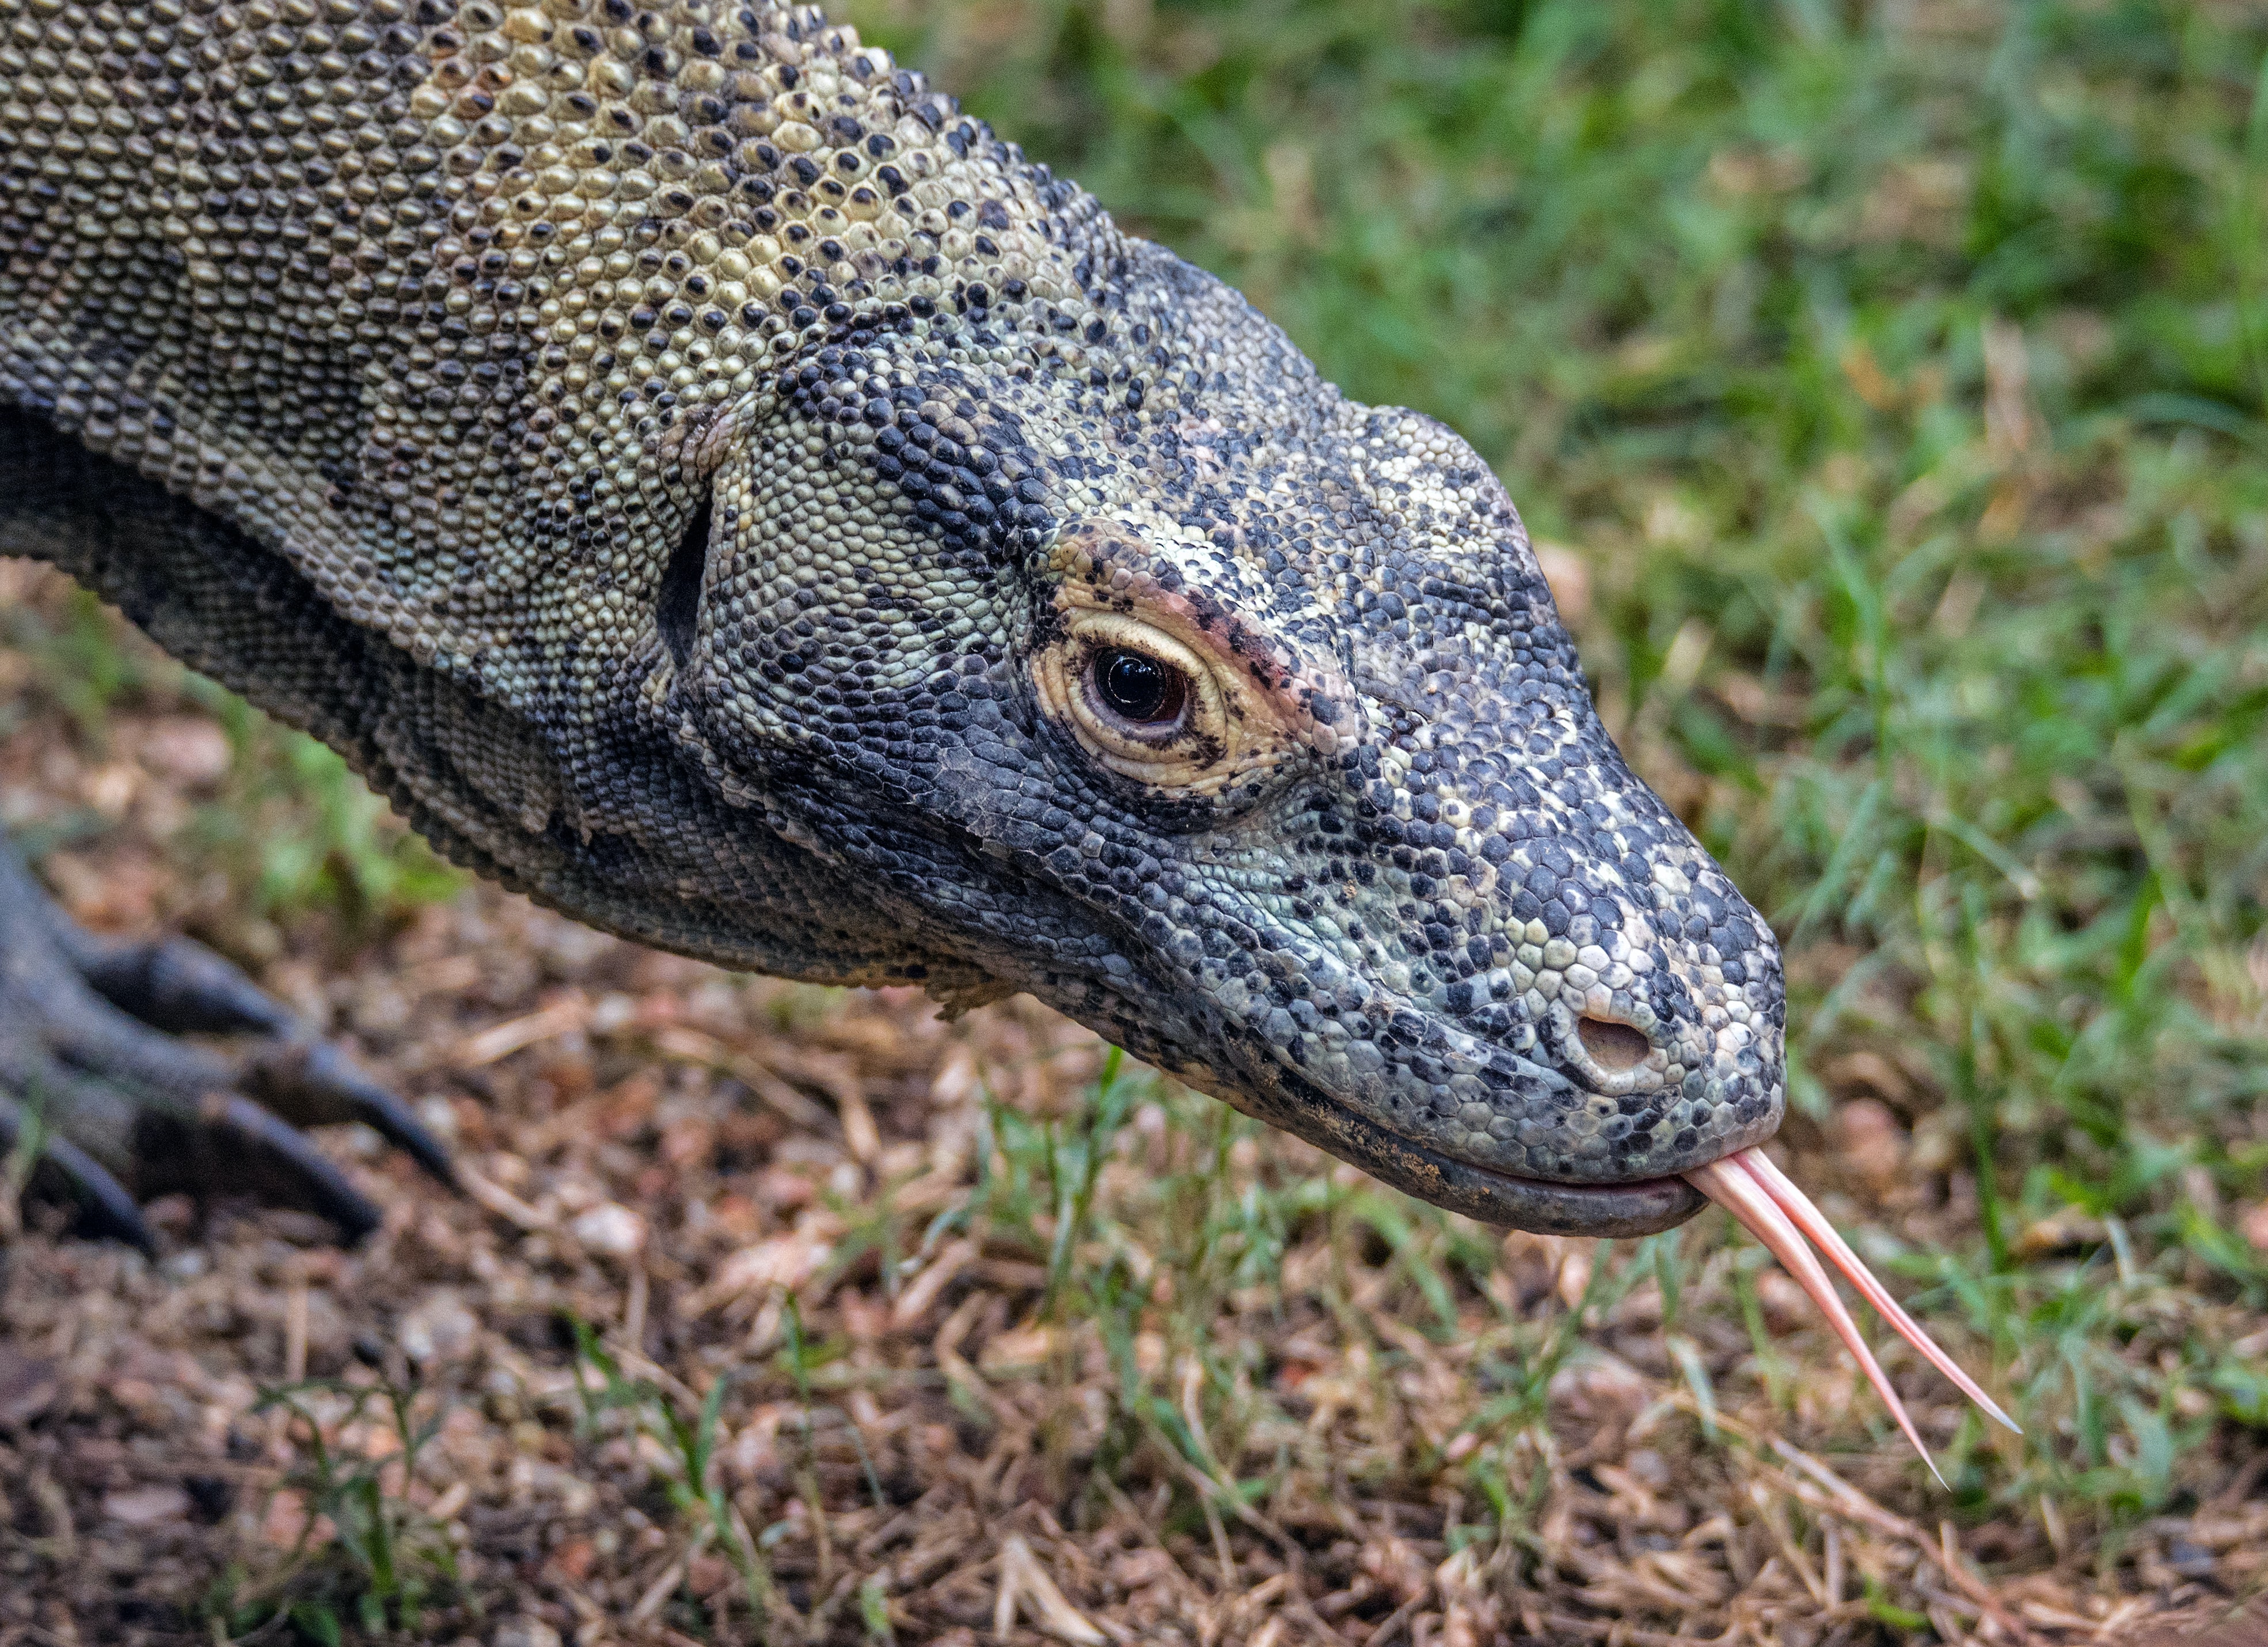 Komodo dragon with tongue out